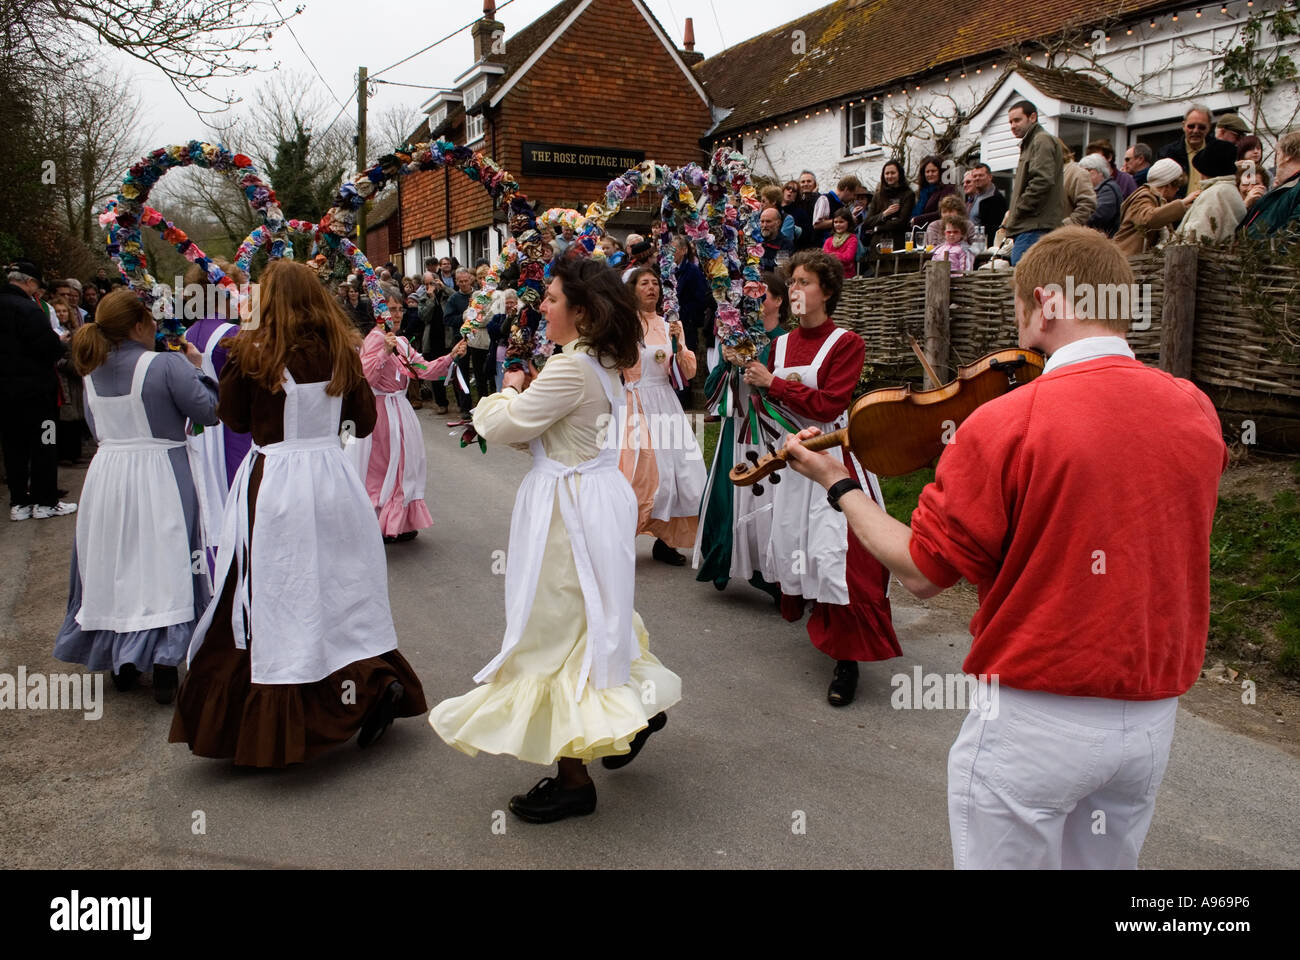 Ladies Morris Dance team, Knots of May women Morris dancers Good Friday, Rose  Cottage Inn. Alciston Sussex England  fiddle violin HOMER SYKES Stock Photo